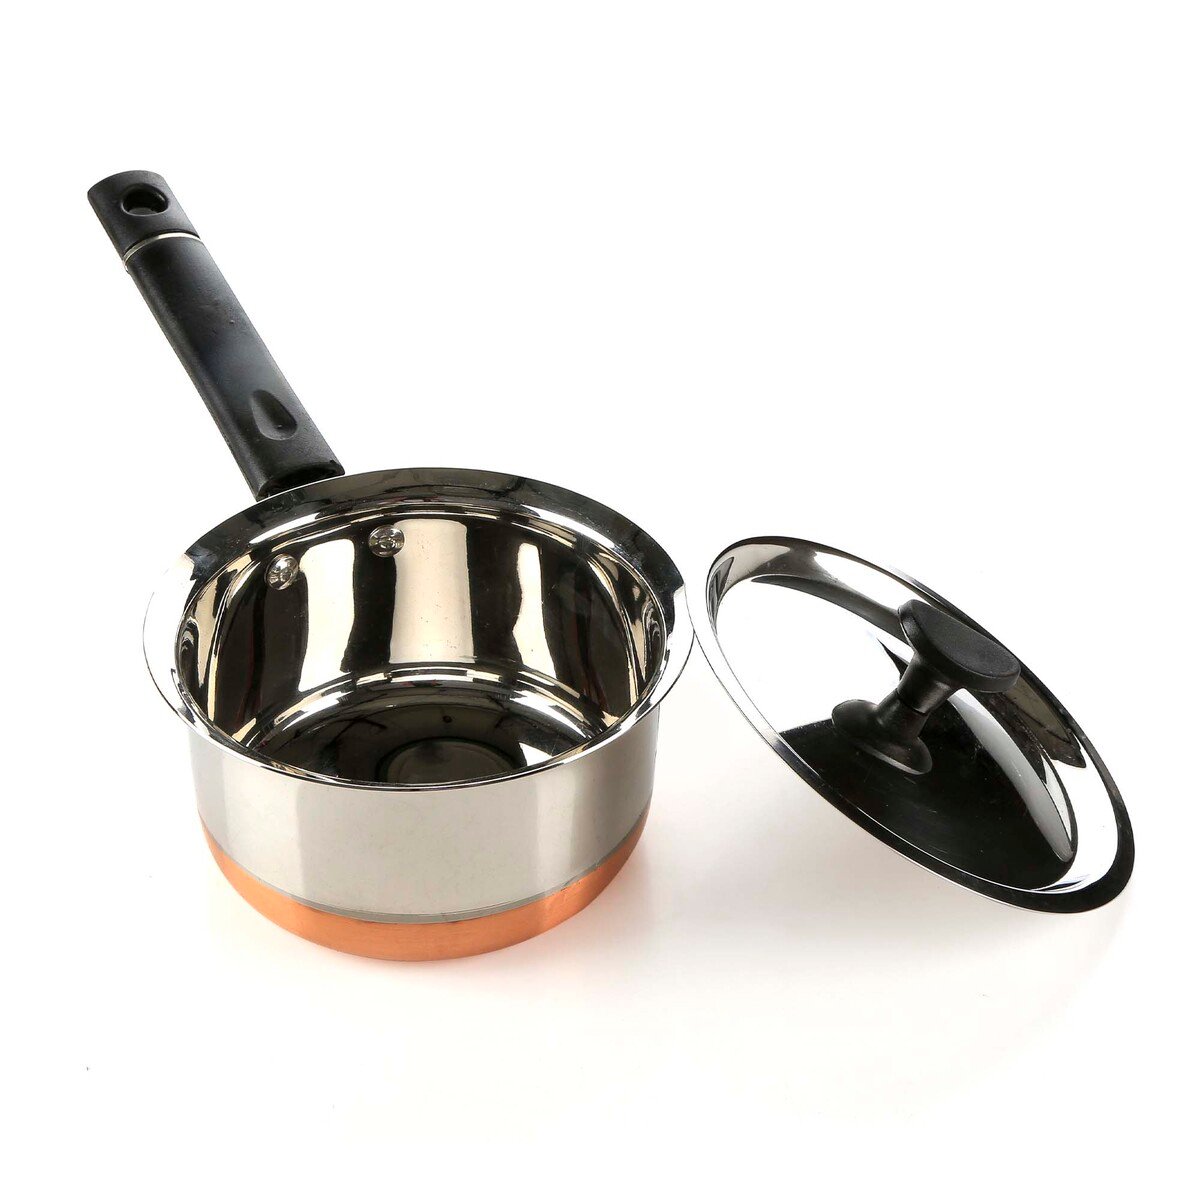 Chefline Copper Saucepan with Lid, Size 10, Stainless Steel, ST10INDSS